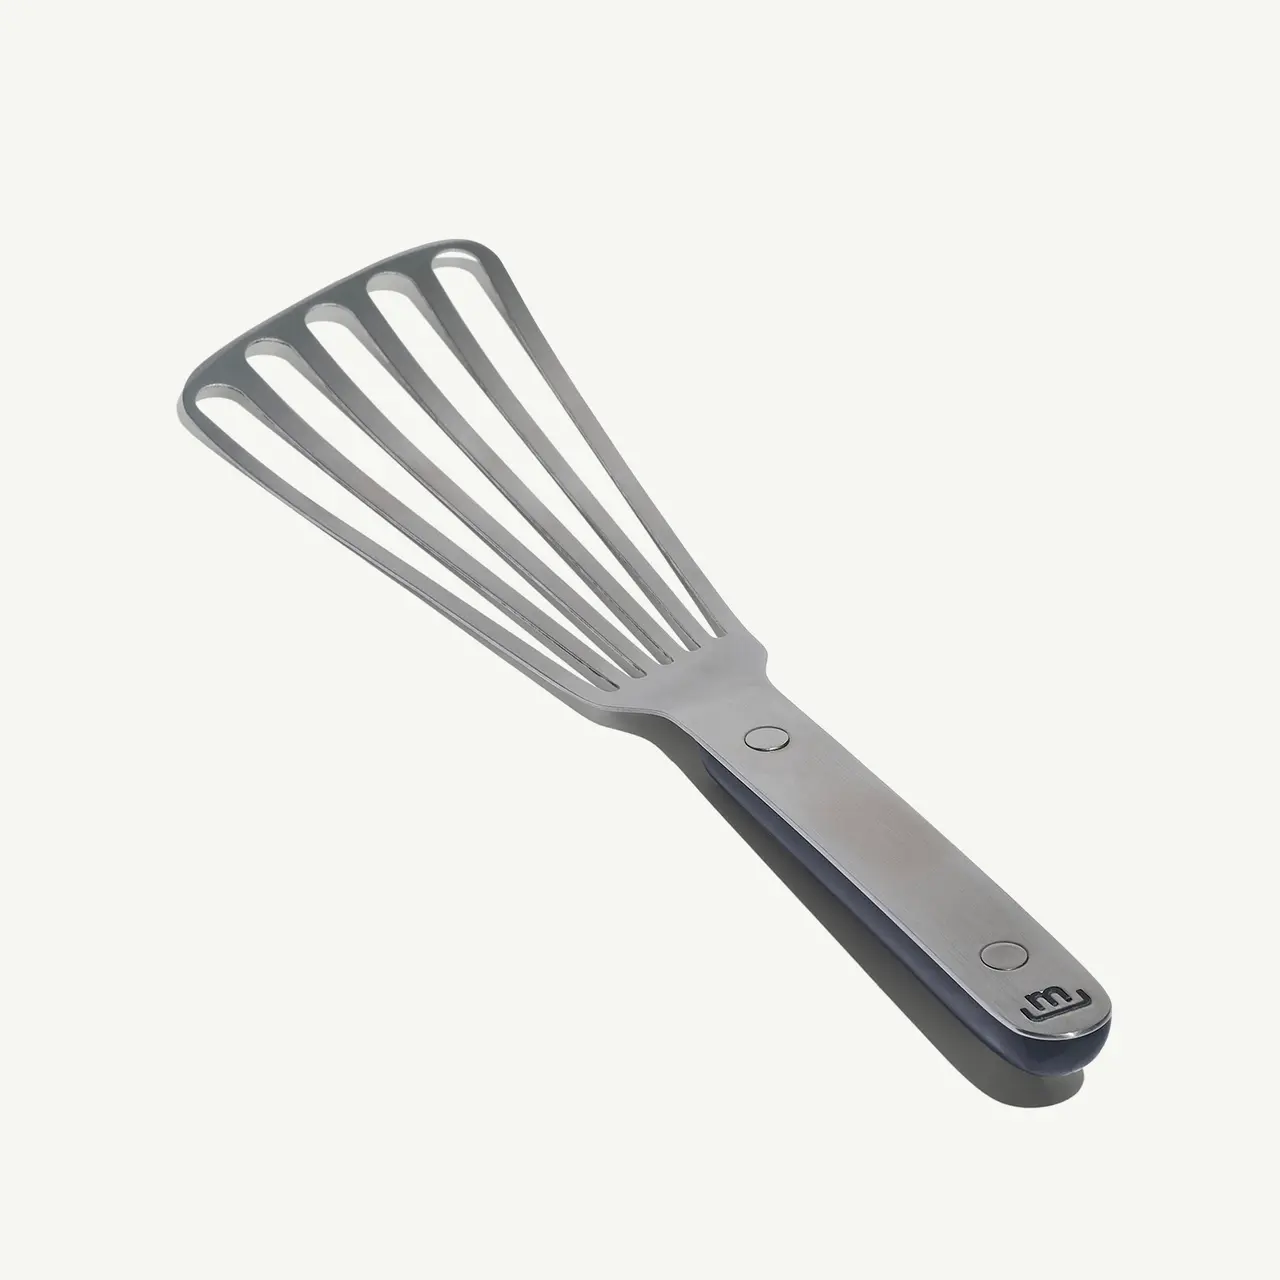 A gray silicone spatula with a metal handle is displayed against a solid background.